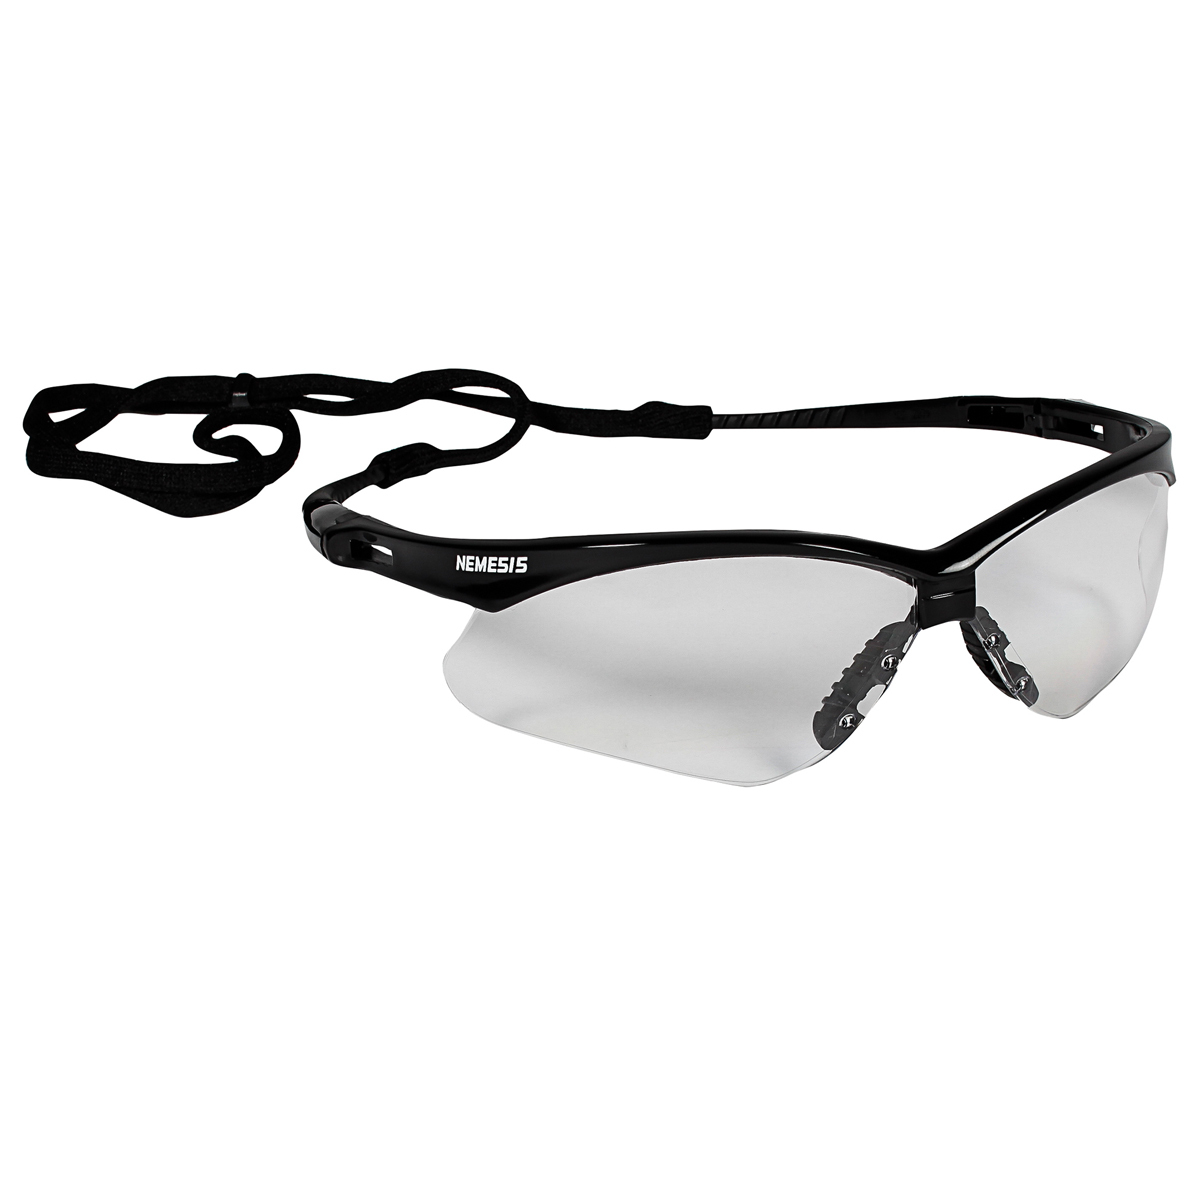 Kimberly-Clark Professional* KleenGuard™ Nemesis* Black Safety Glasses With Clear Hard Coat Lens (Availability restrictions appl